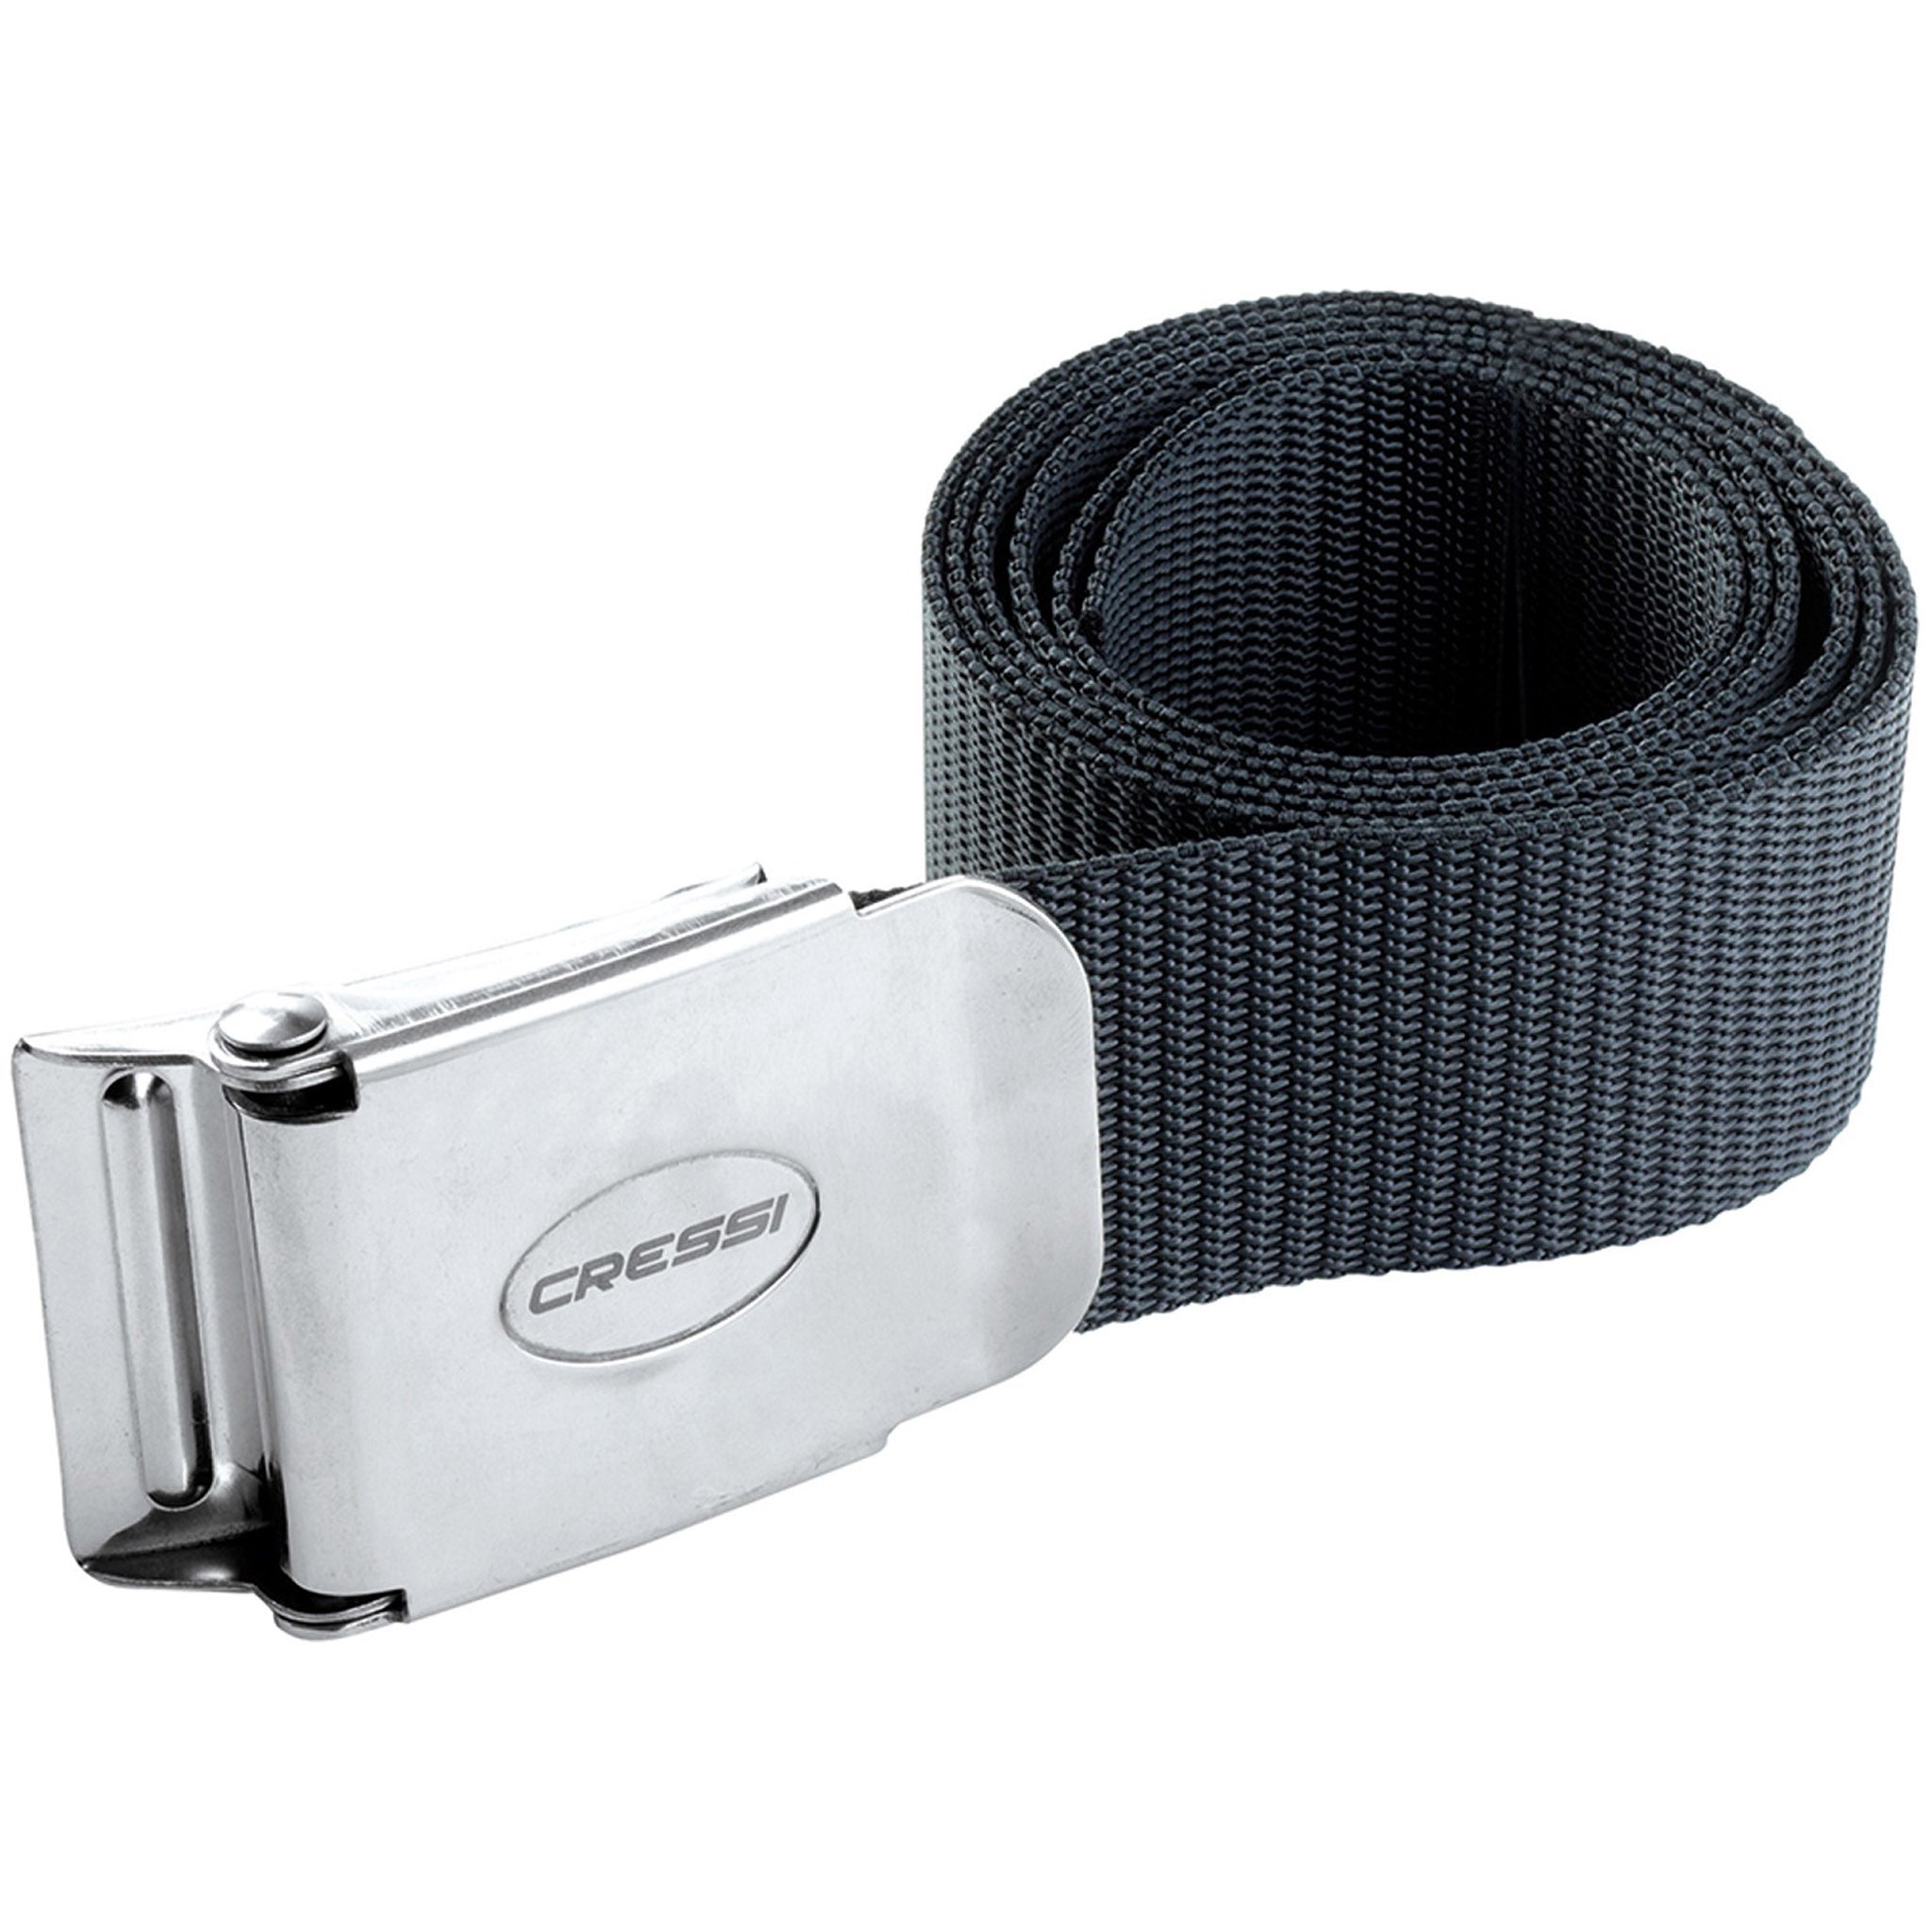 Cressi Webbing Weight Belt with Stainless Steel Buckle